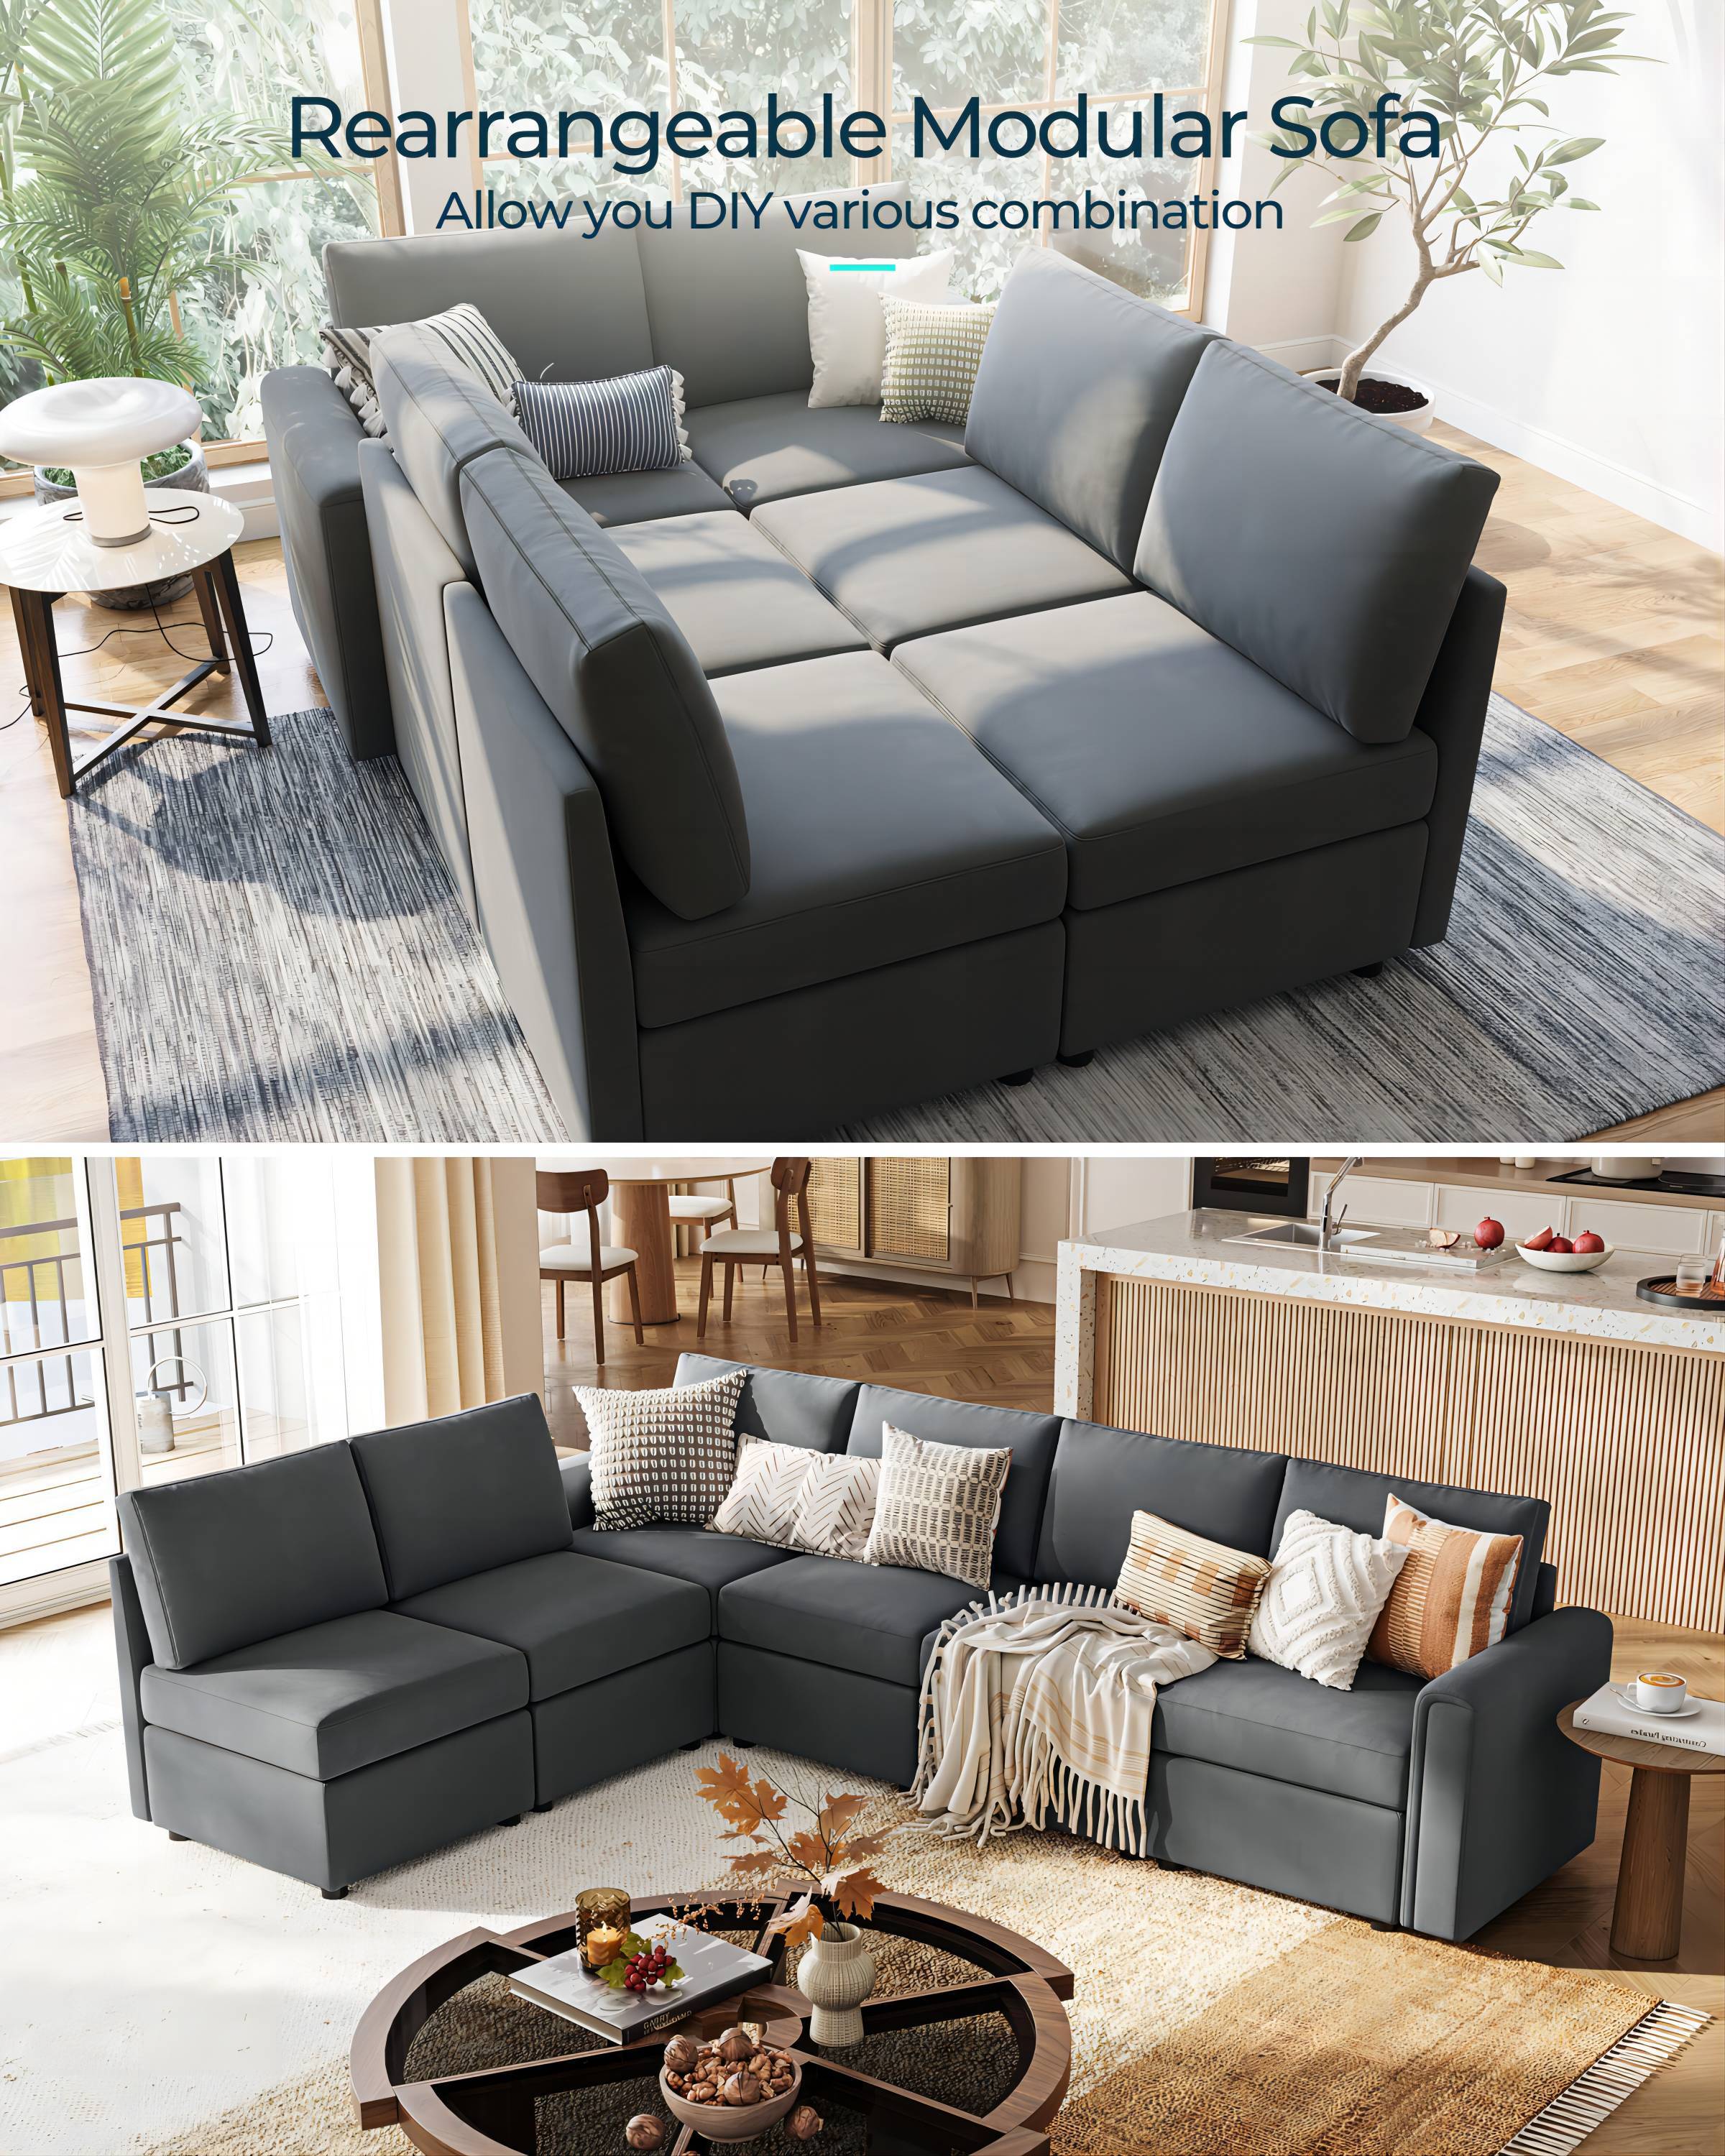 LINSY HOME Modular Couches and Sofas Sectional with Storage Sectional Sofa U Shaped Sectional Couch with Reversible Chaises, Dark Gray - image 4 of 13